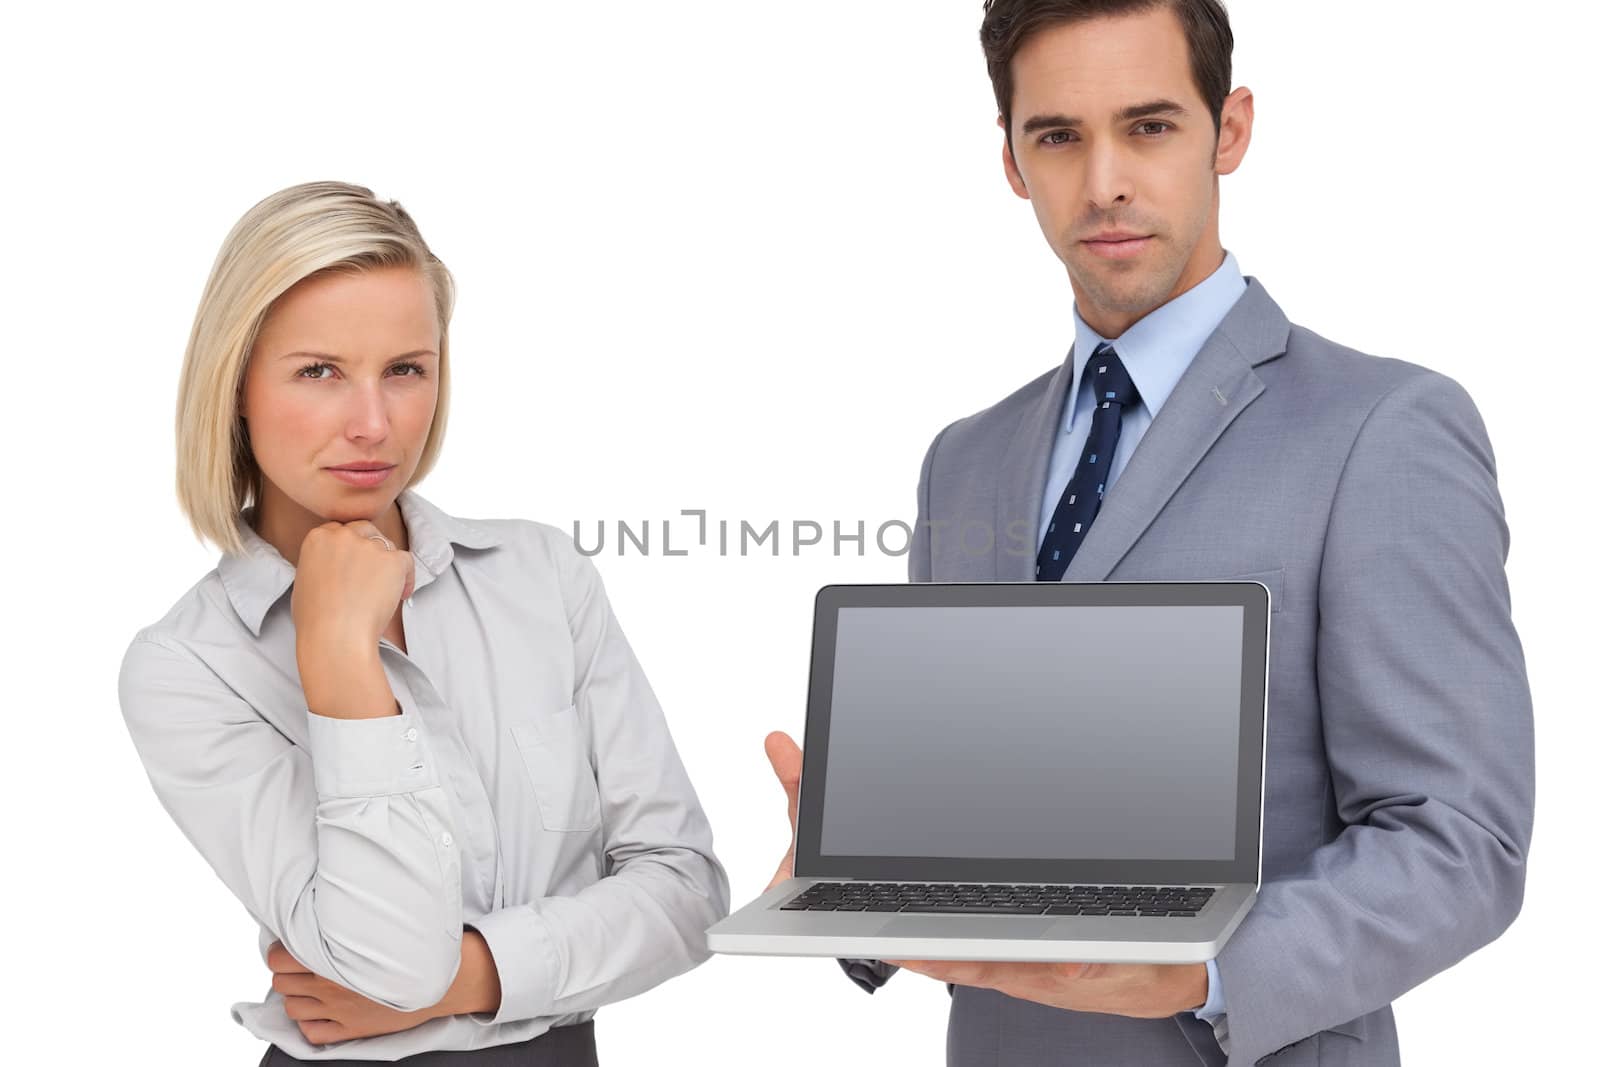 Business people presenting a laptop by Wavebreakmedia